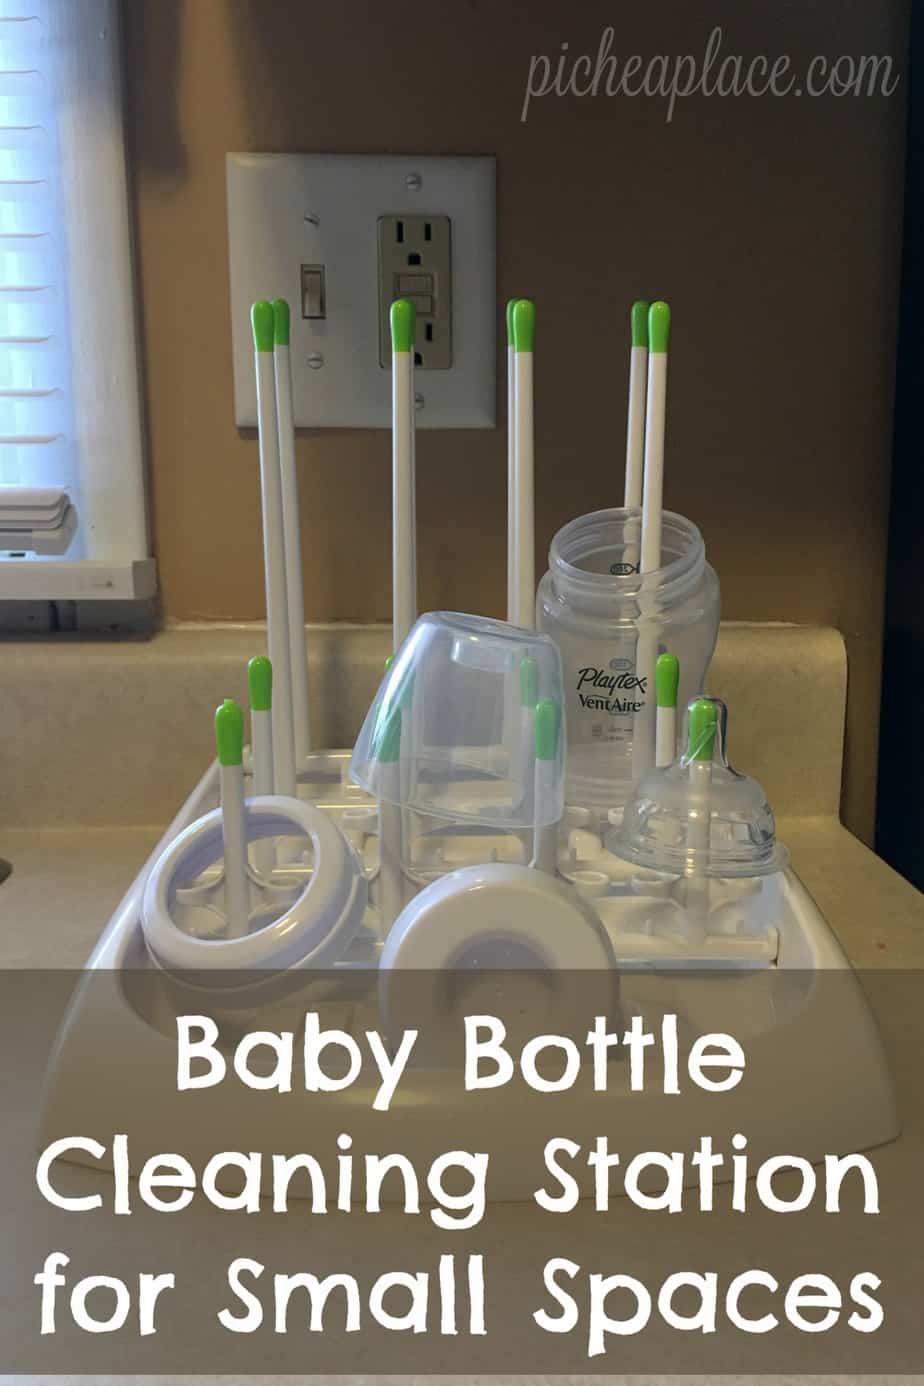 https://picheaplace.com/wp-content/uploads/2016/08/Baby-Bottle-Cleaning-Station-for-Small-Spaces-PIN.jpg